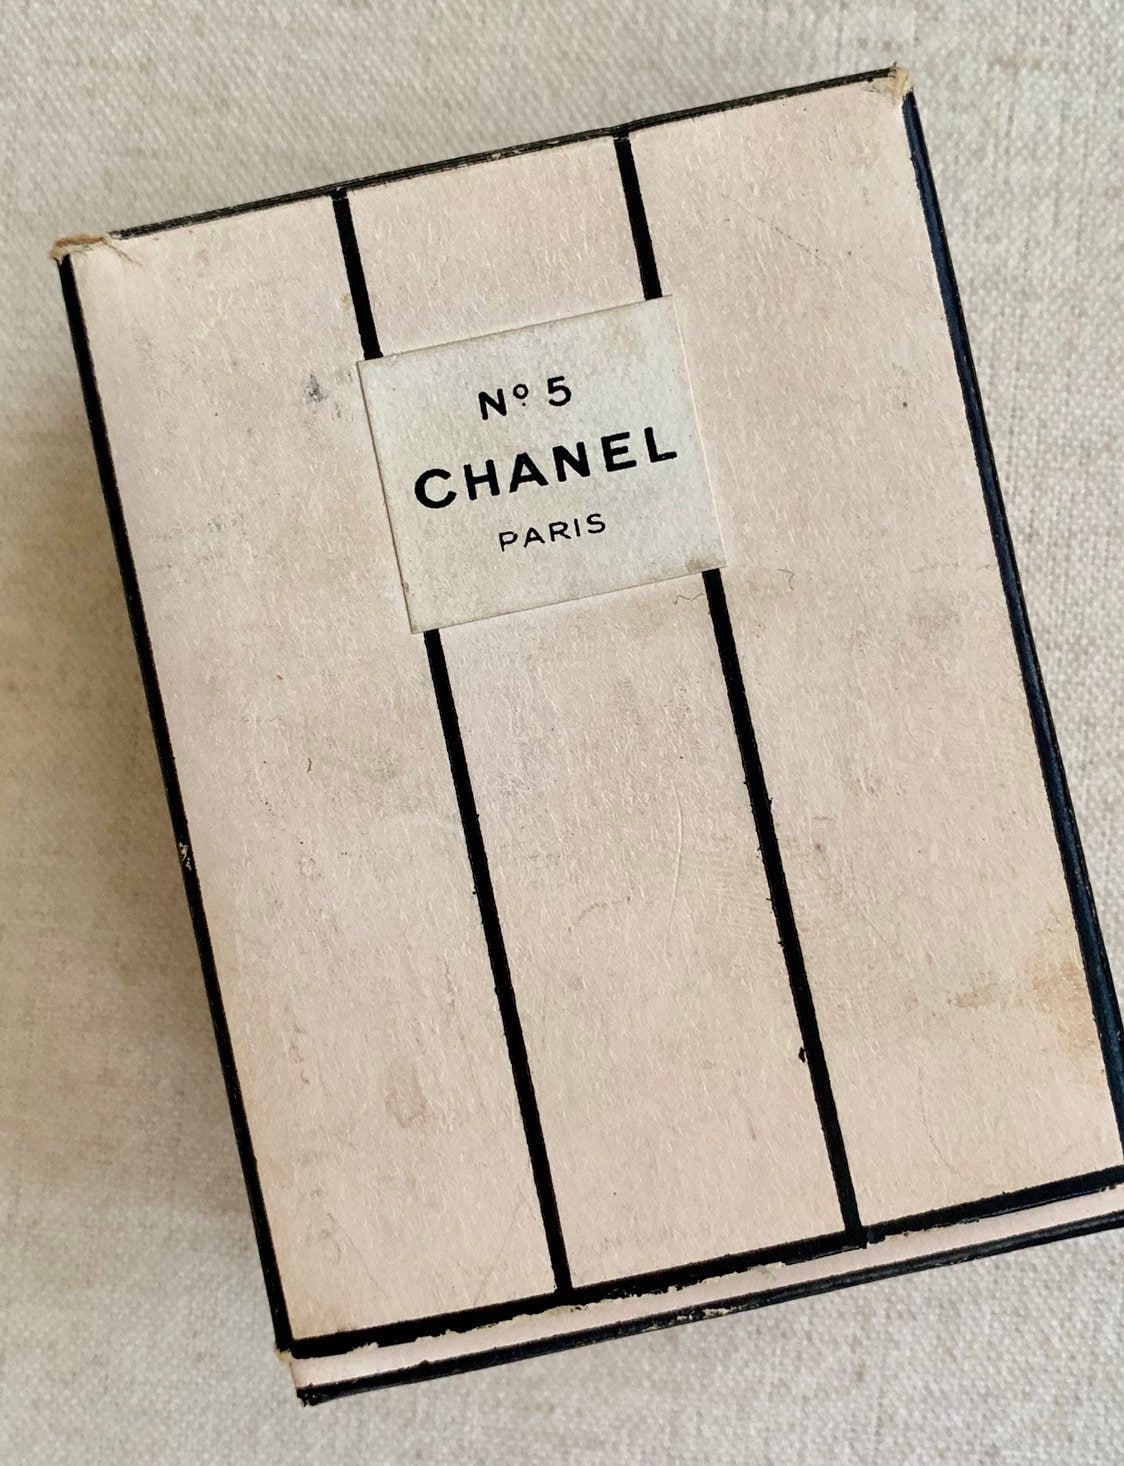 Chanel No 5 Perfume with Rare Original Box Packaging Vintage Old Full Glass  Bottle Made in France Extrait TPM No 200 Black White